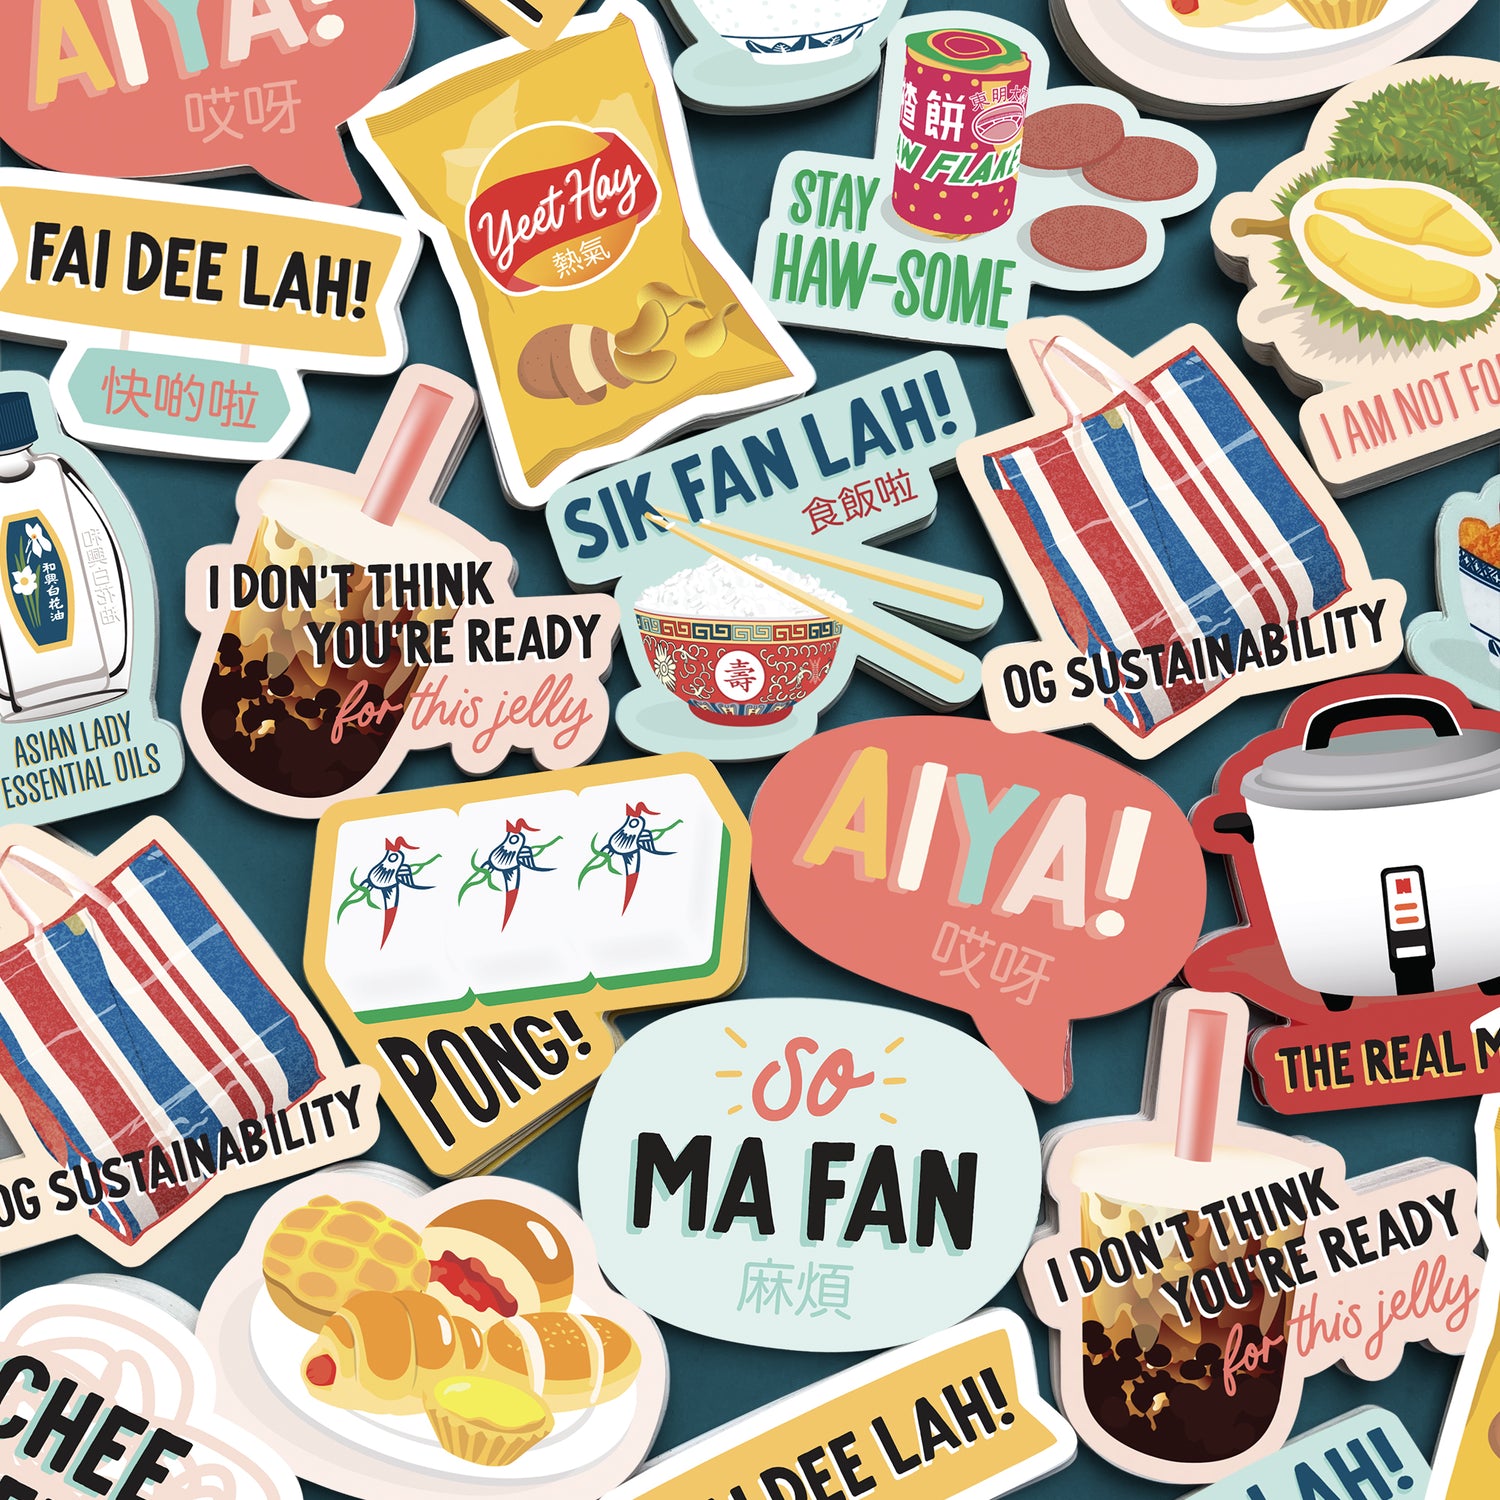 Asian-themed vinyl stickers by I&